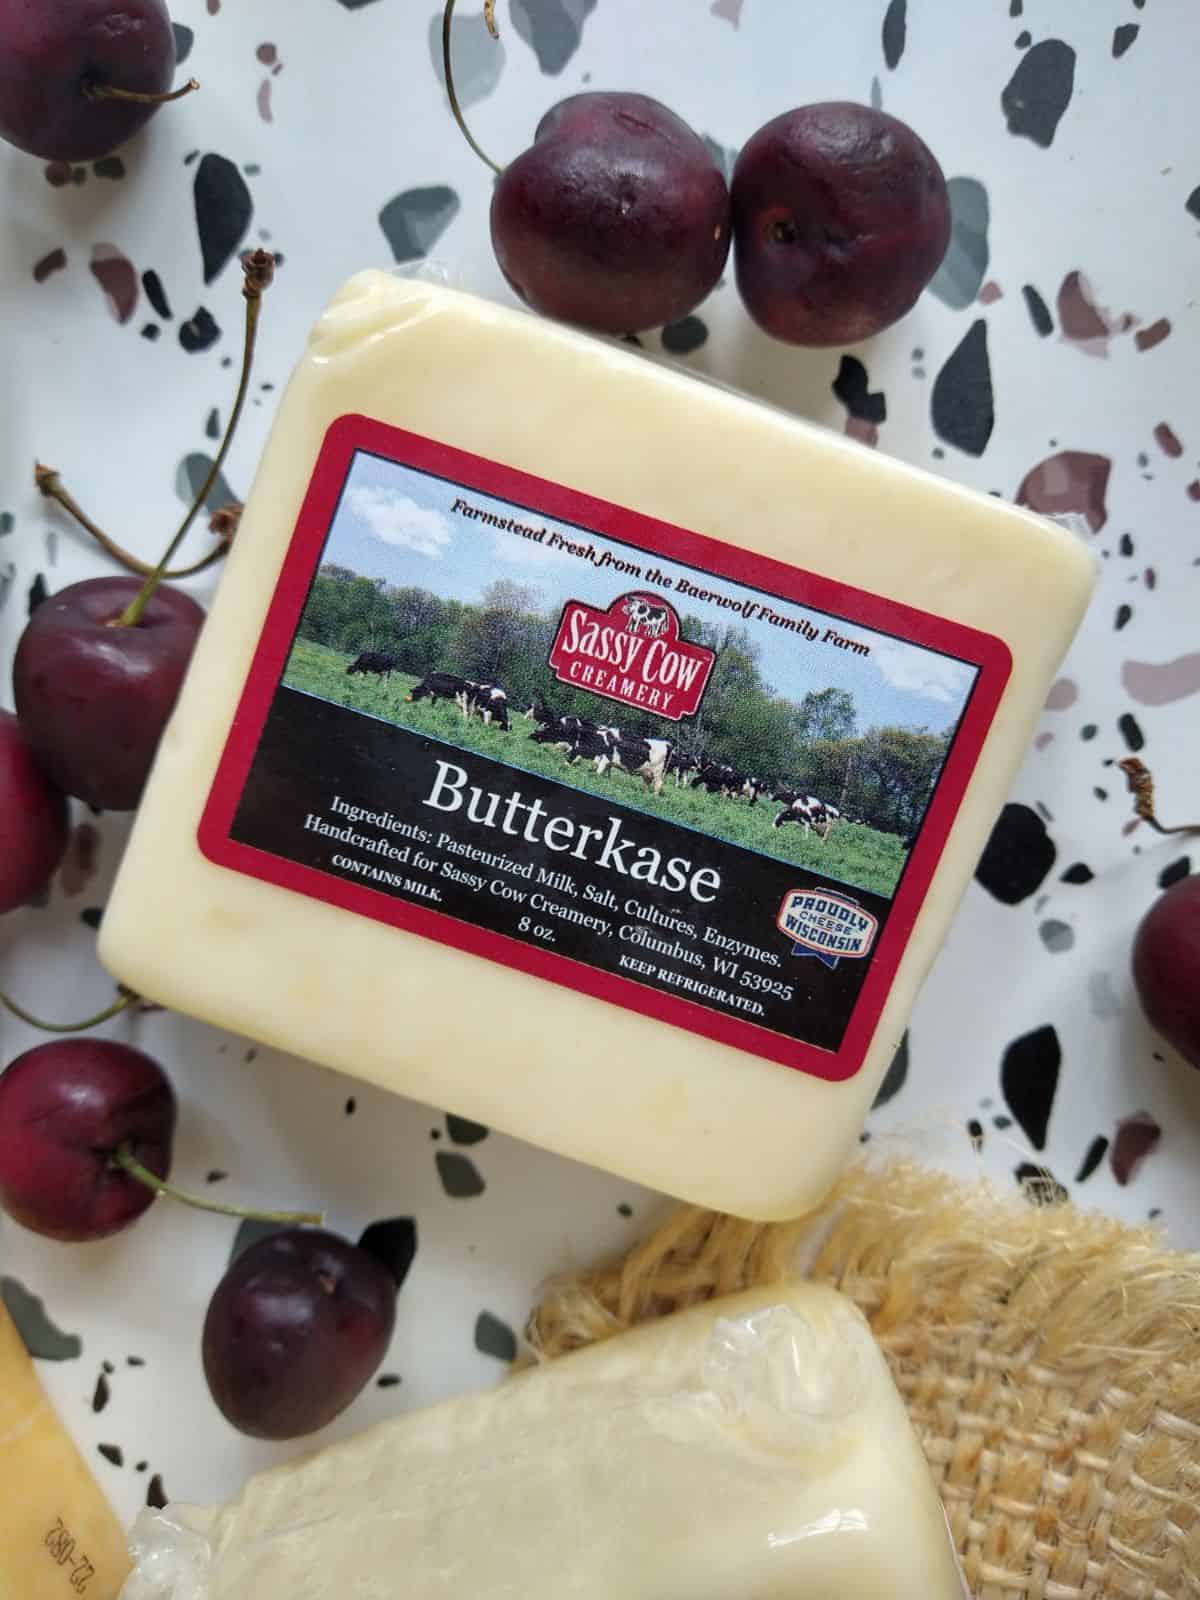 Sassy Cow Creamery Butterkase cheese sitting on a white table with spots along with fresh dark red cherries.